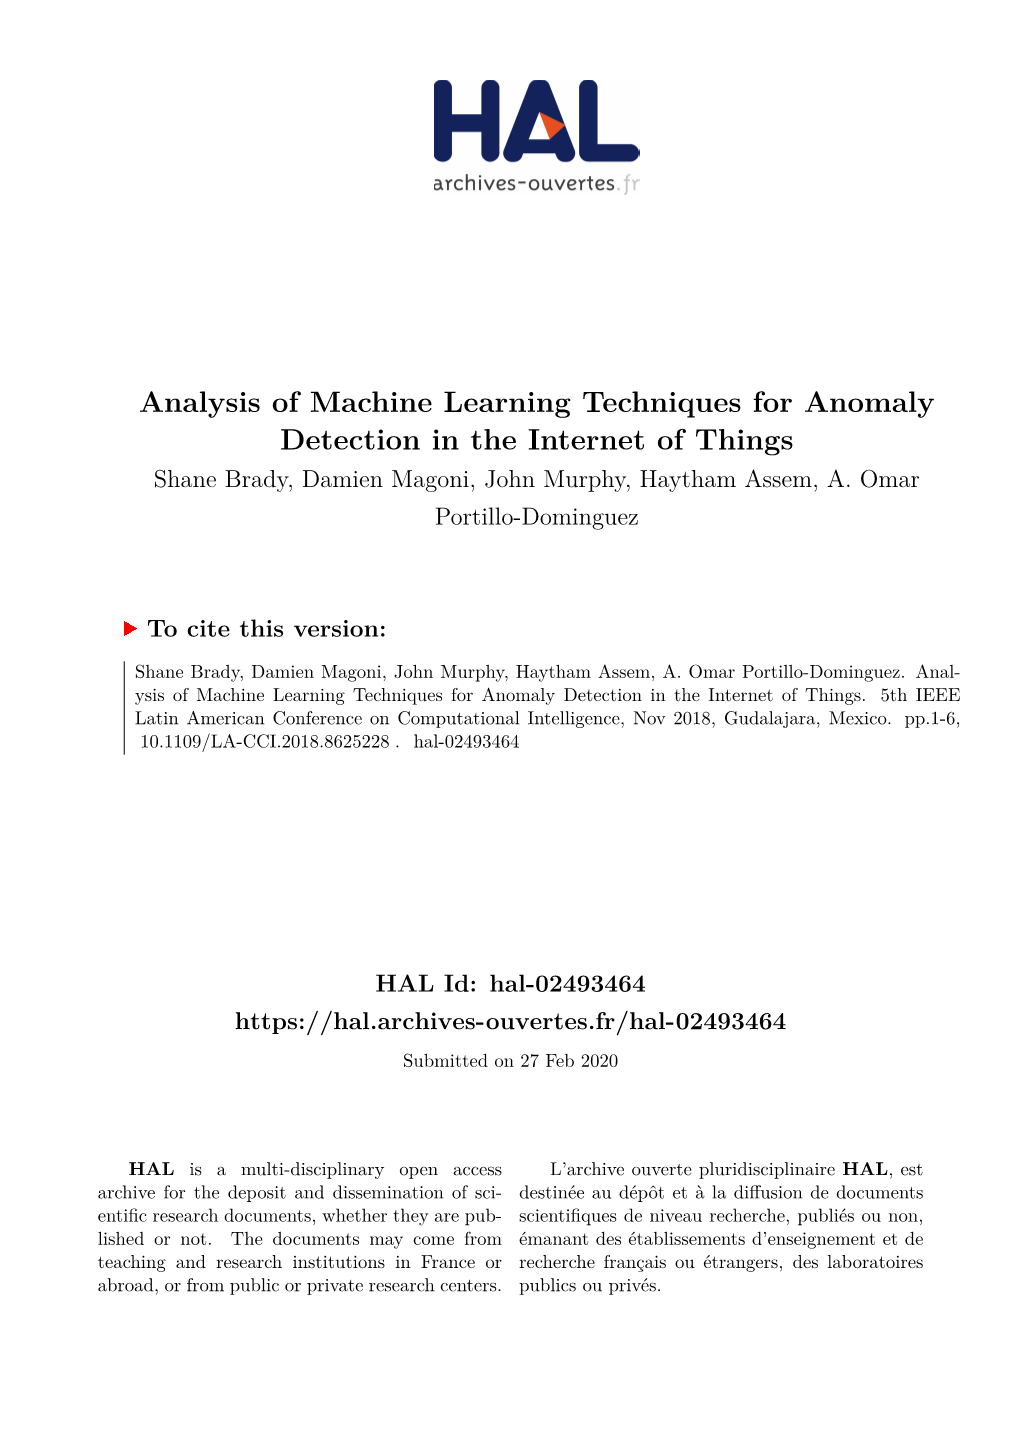 Analysis of Machine Learning Techniques for Anomaly Detection in the Internet of Things Shane Brady, Damien Magoni, John Murphy, Haytham Assem, A